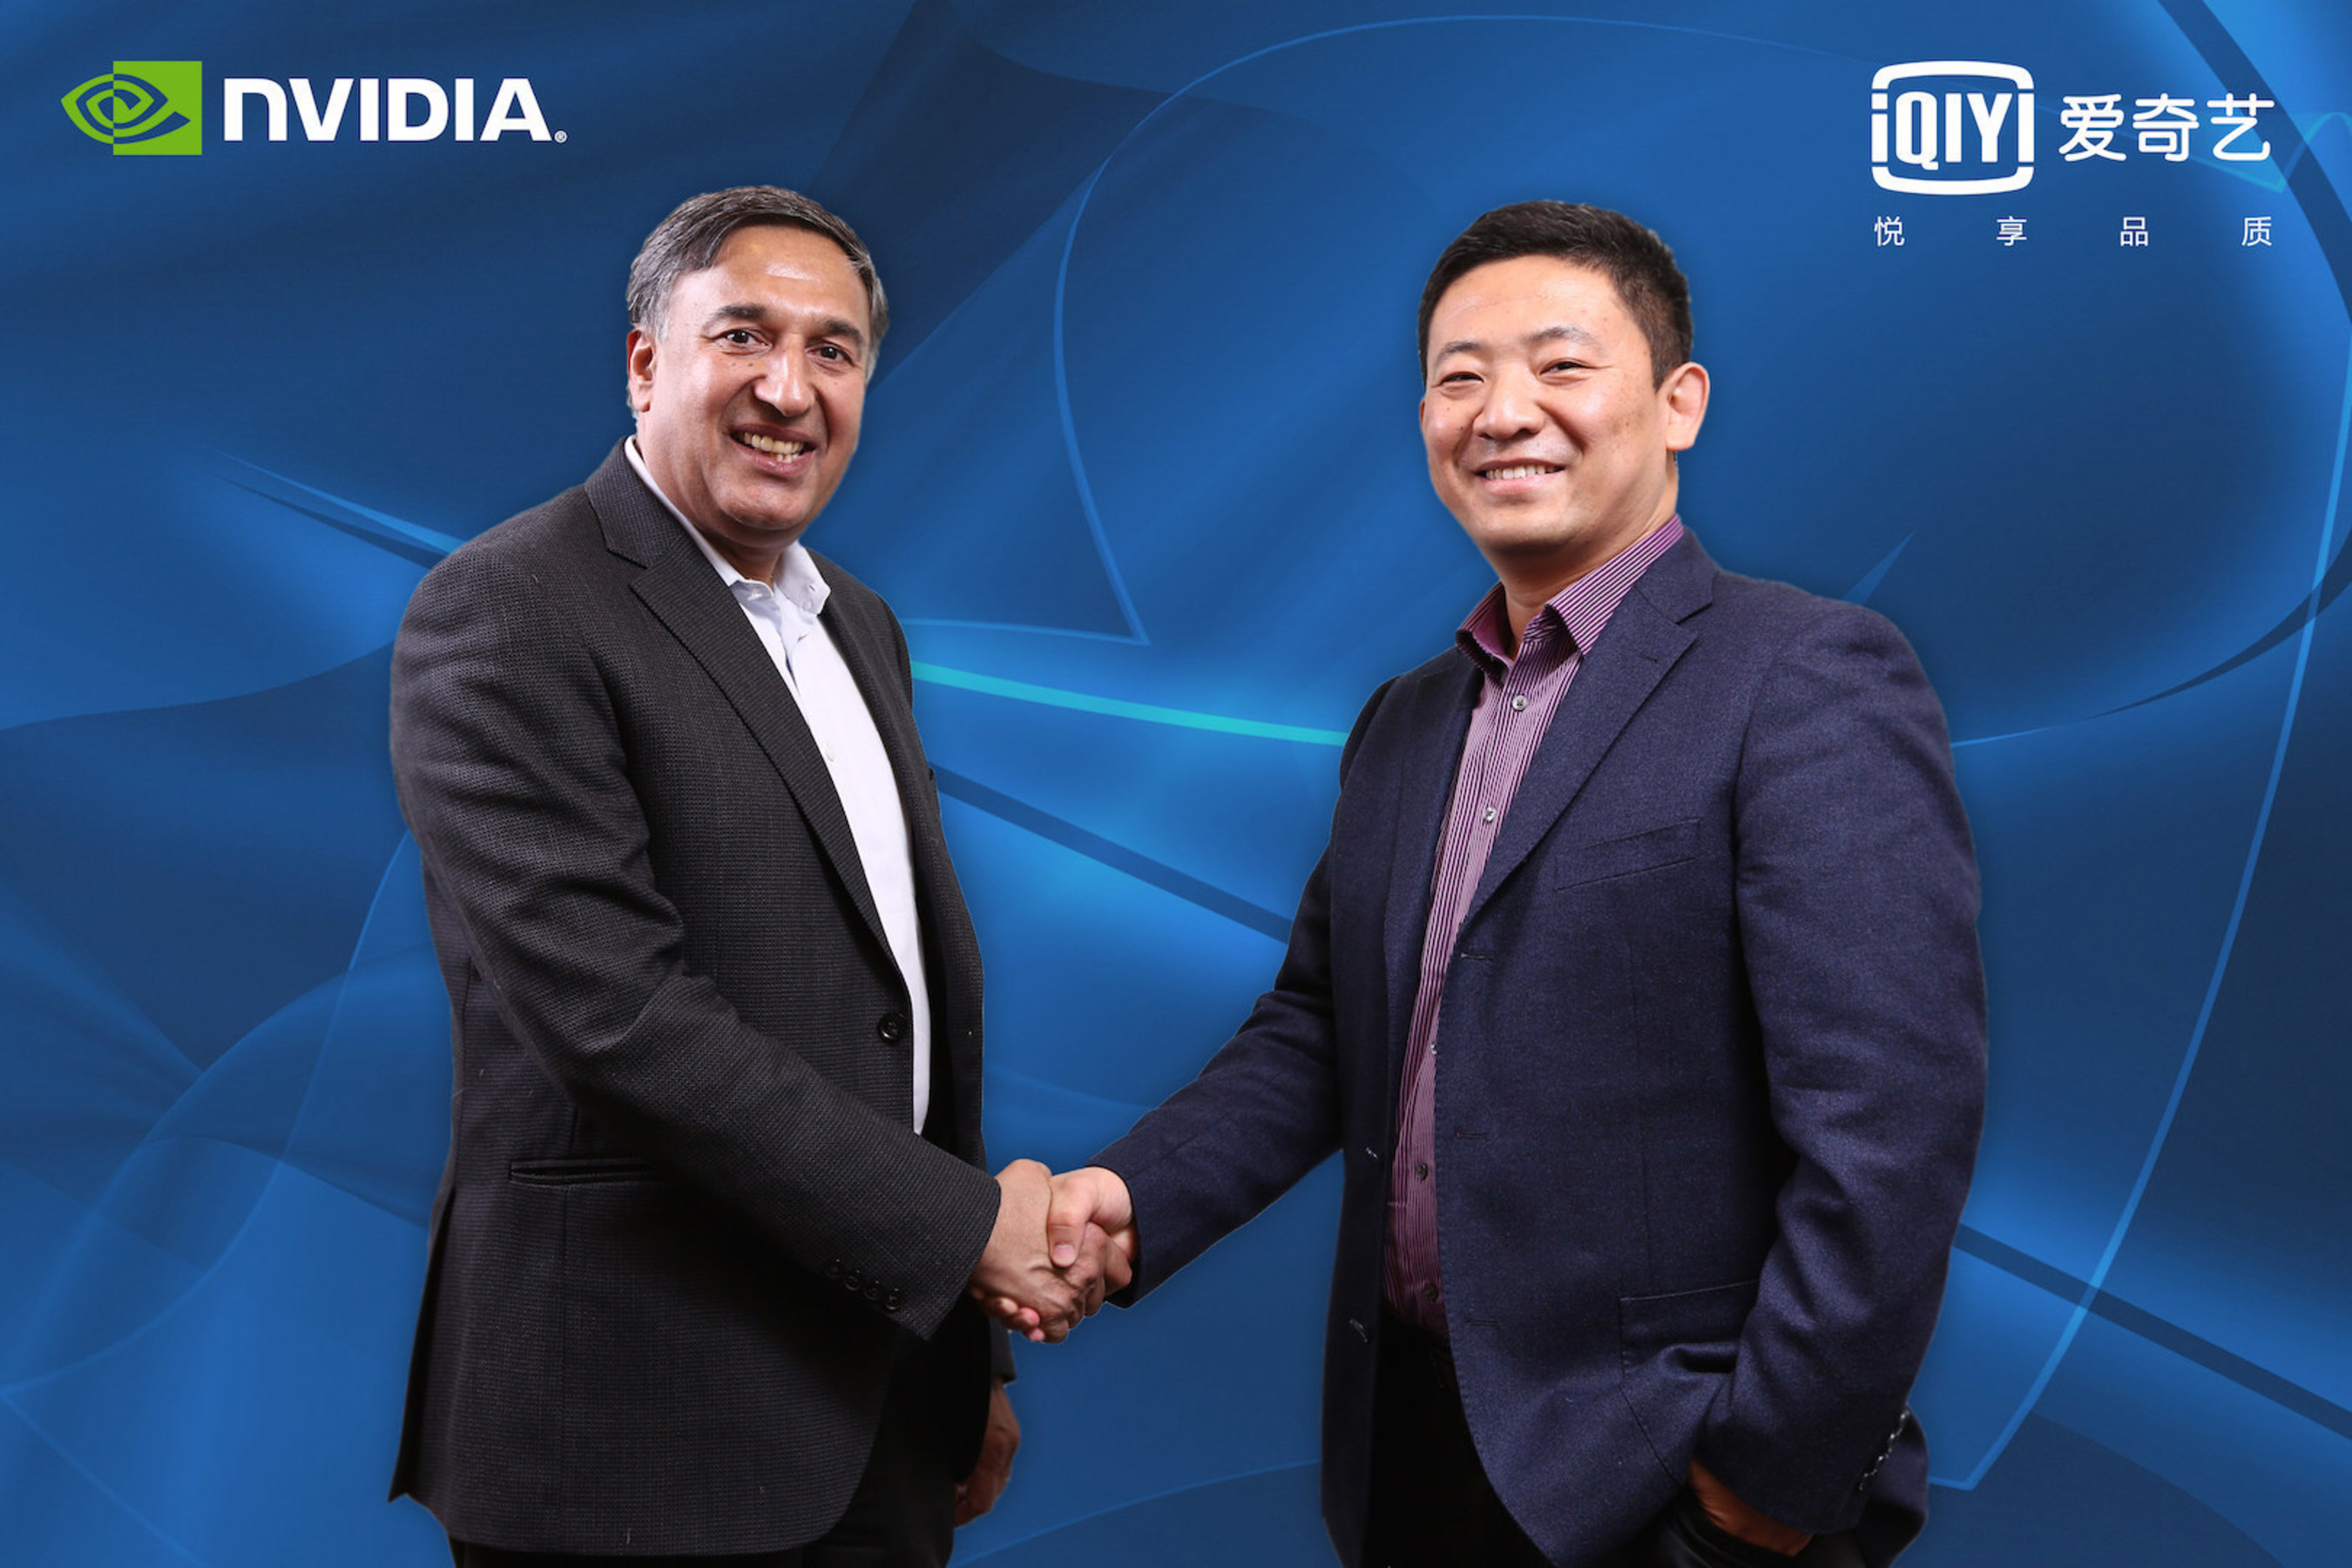 Vice President for Industry Business Development and Worldwide Sales Mr. Shanker Trivedi and iQIYI Chief Technology Officer Mr. Xing Tang